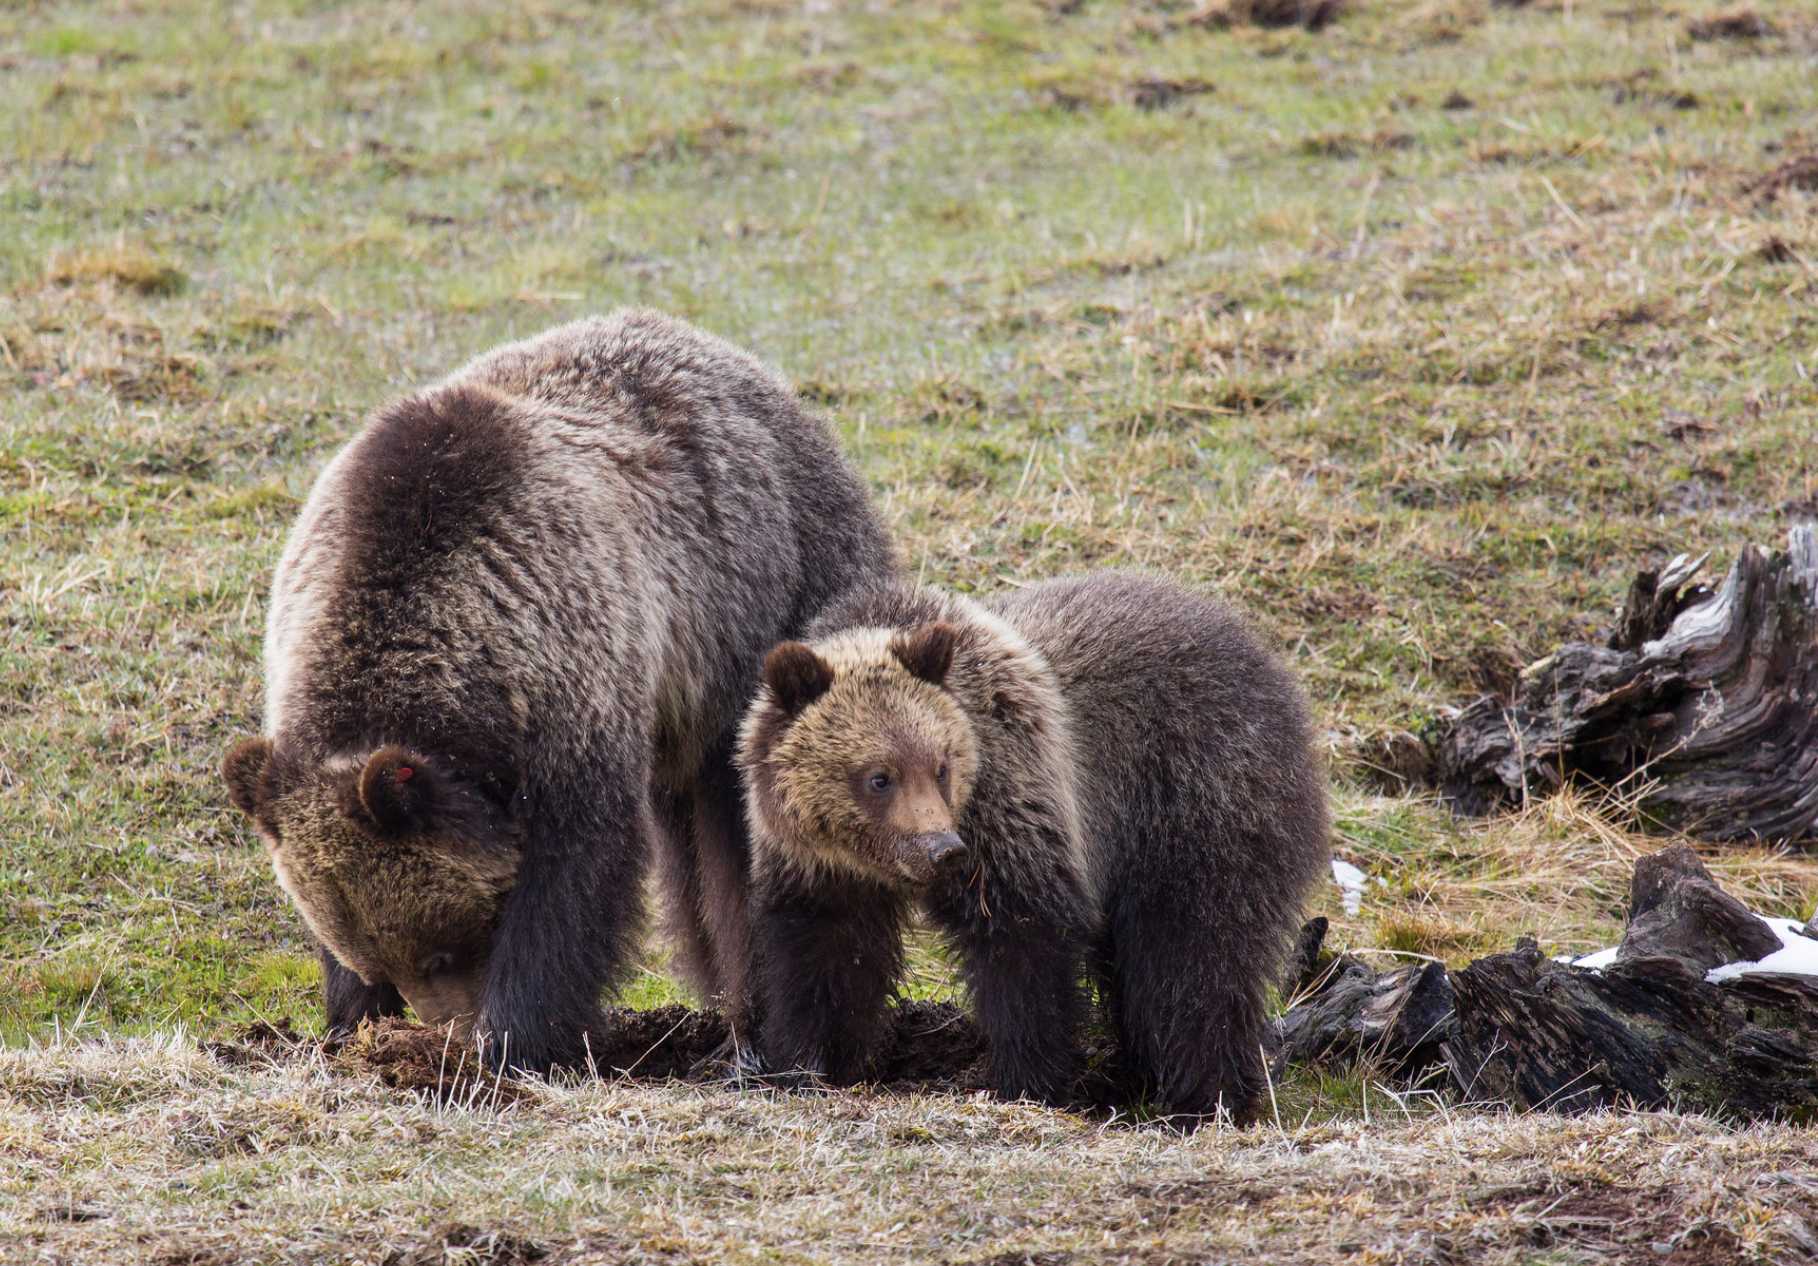 Yellowstone Guide Helps Trucker Narrowly Avoid Grizzly Attack After Colliding With Yearling